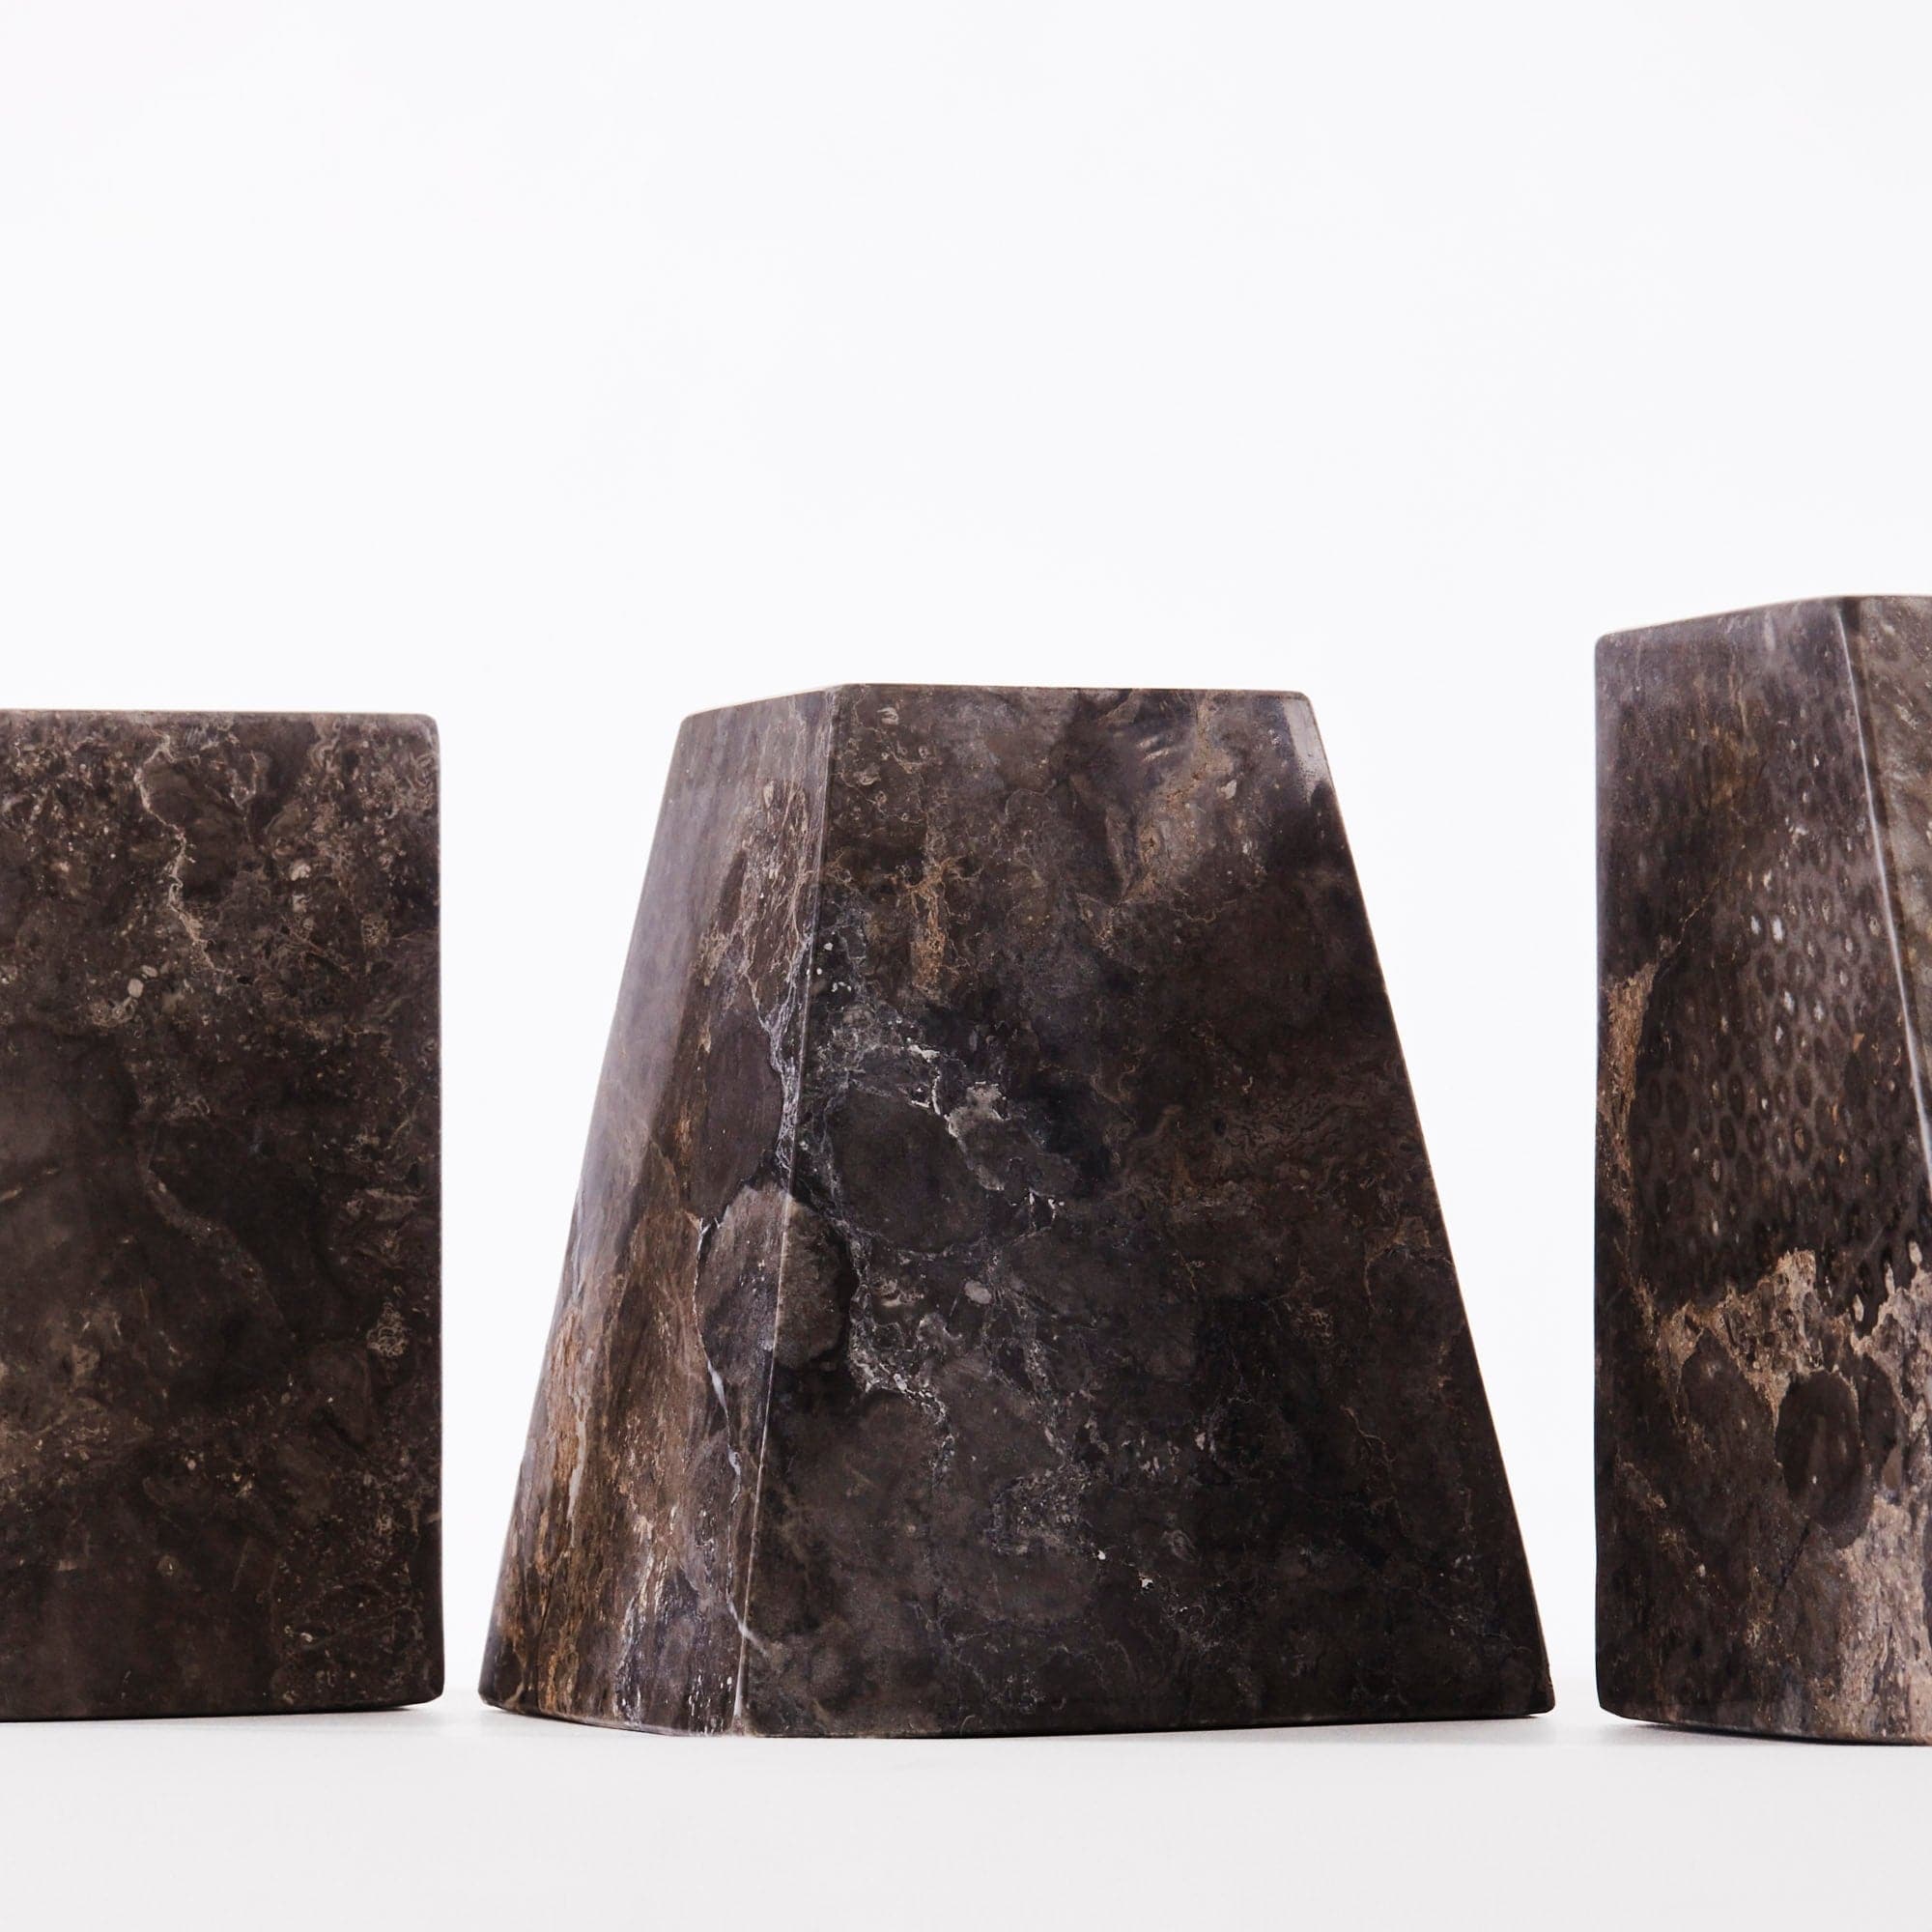 Pyramid Candle Holders Grey - THAT COOL LIVING